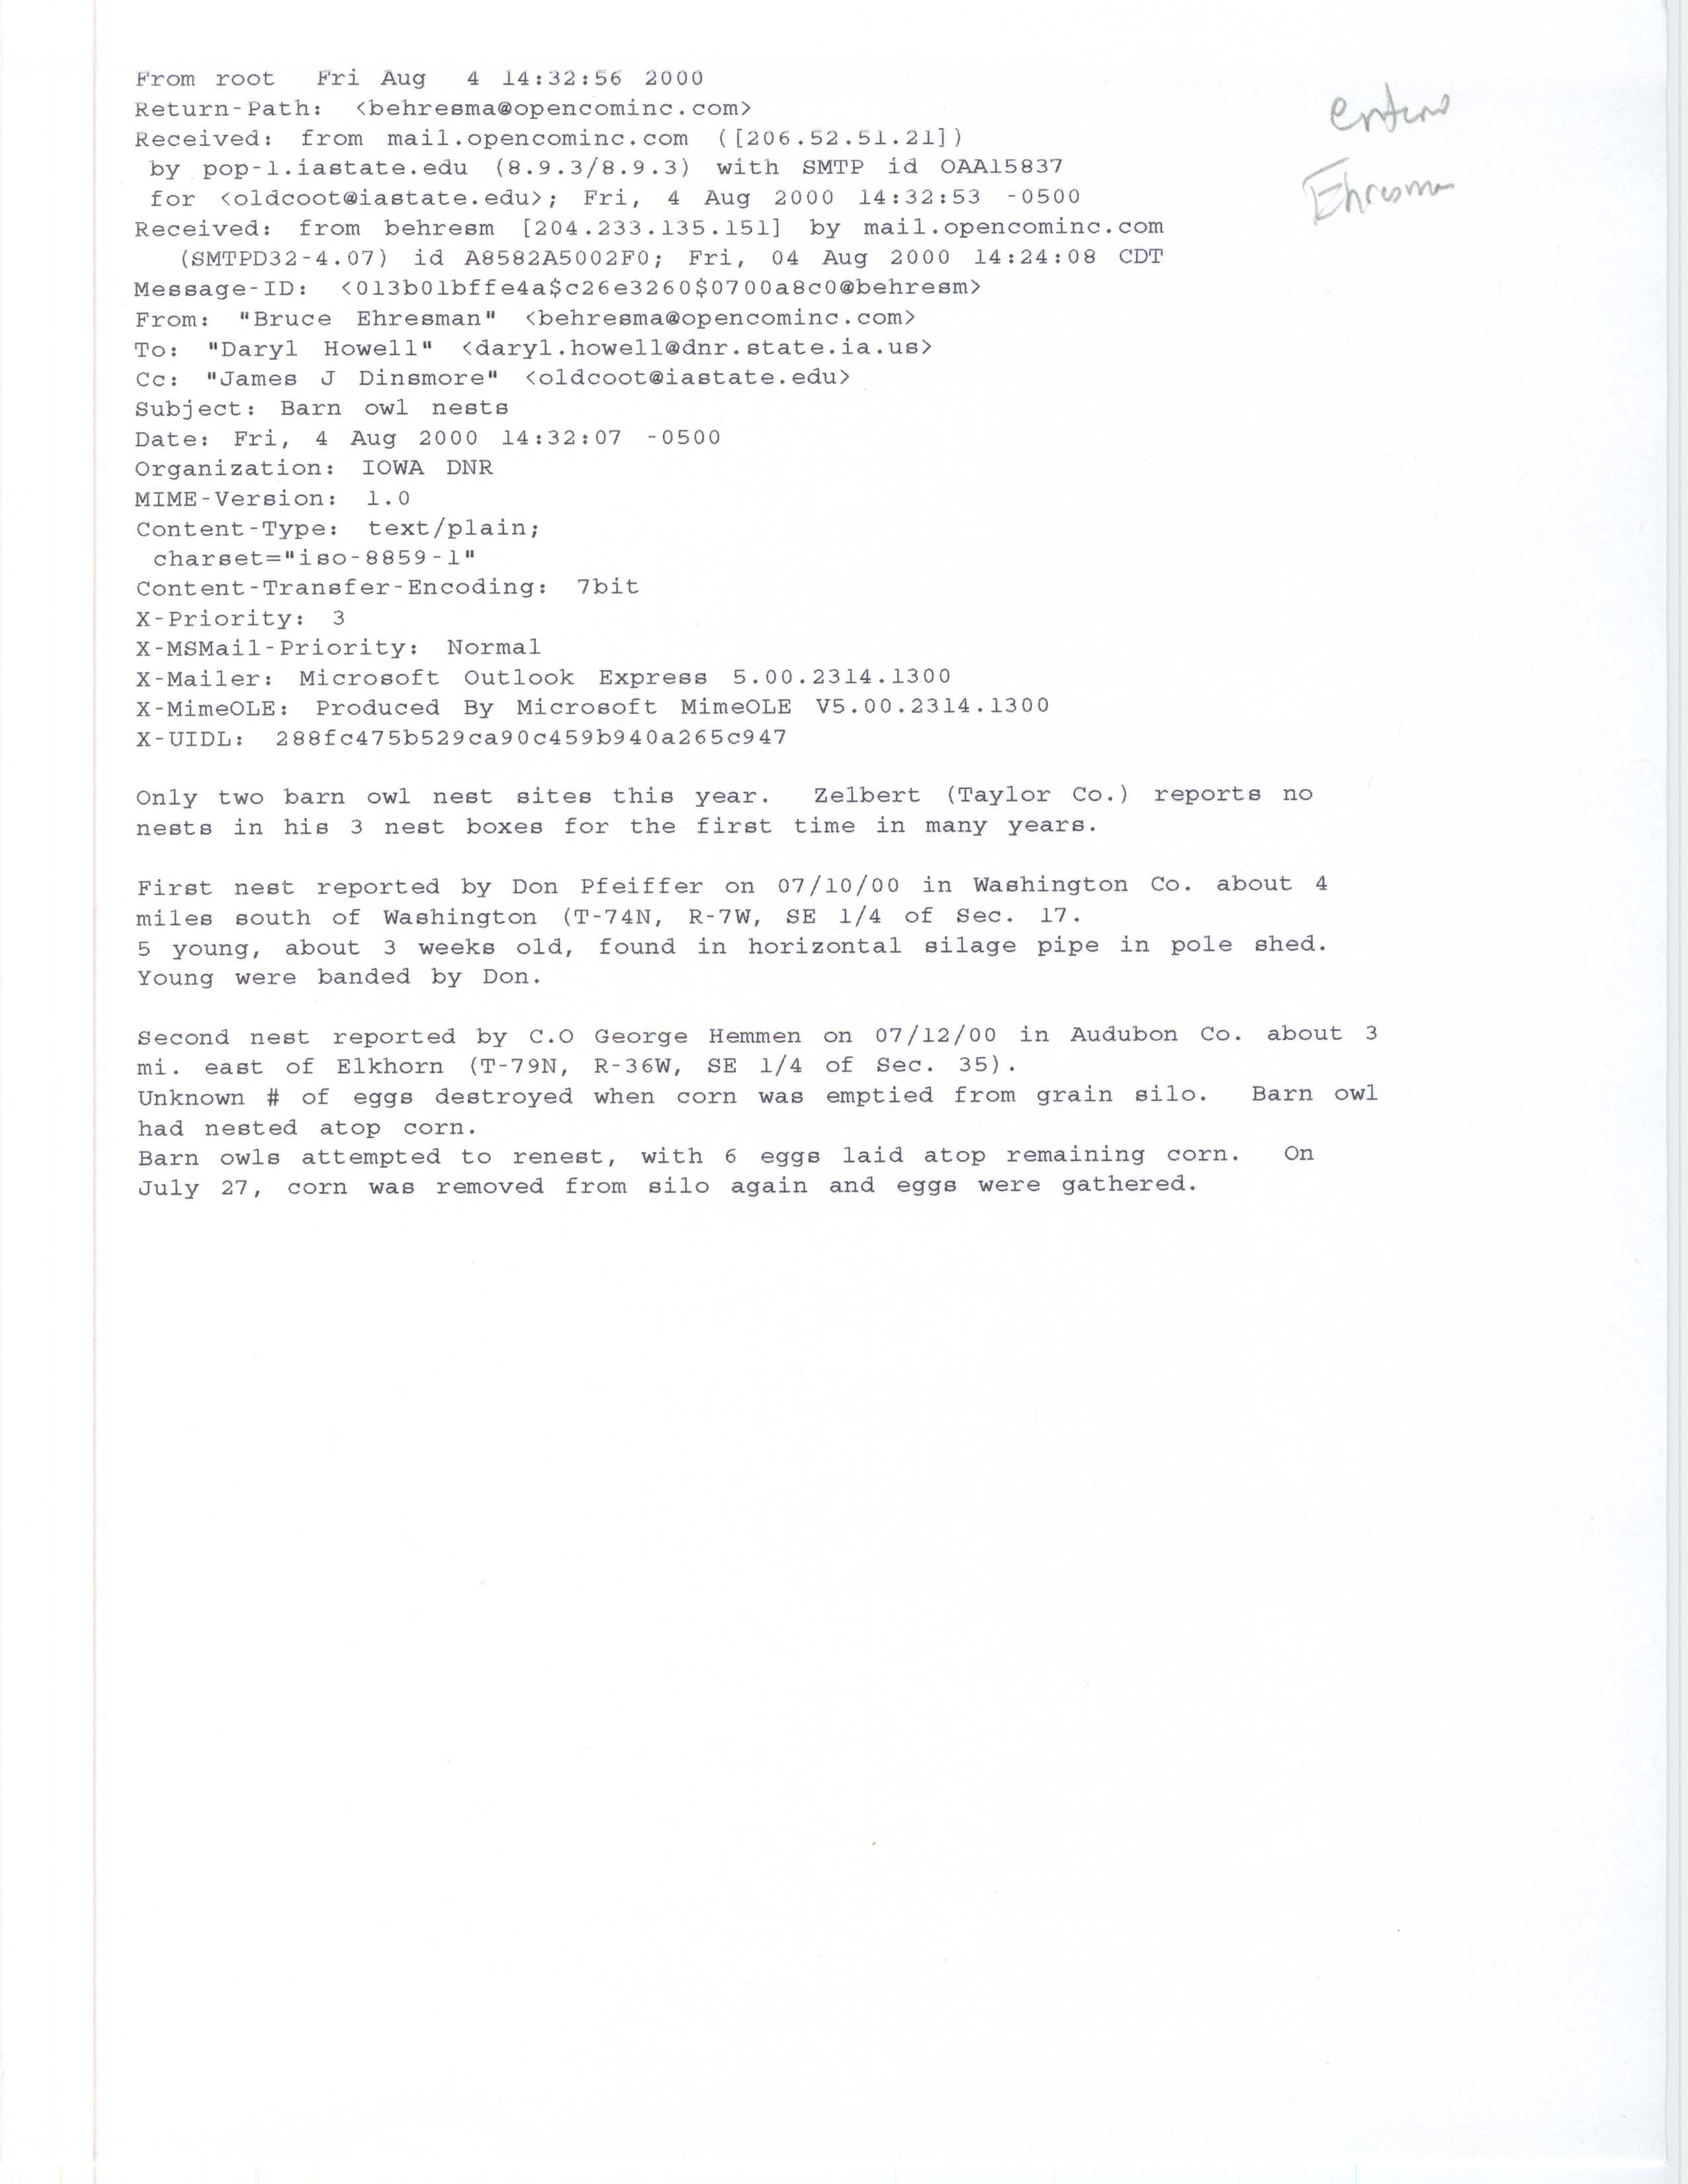 Bruce Ehresman email to Daryl Howell and James J. Dinsmore regarding Barn Owl nests, August 4, 2000